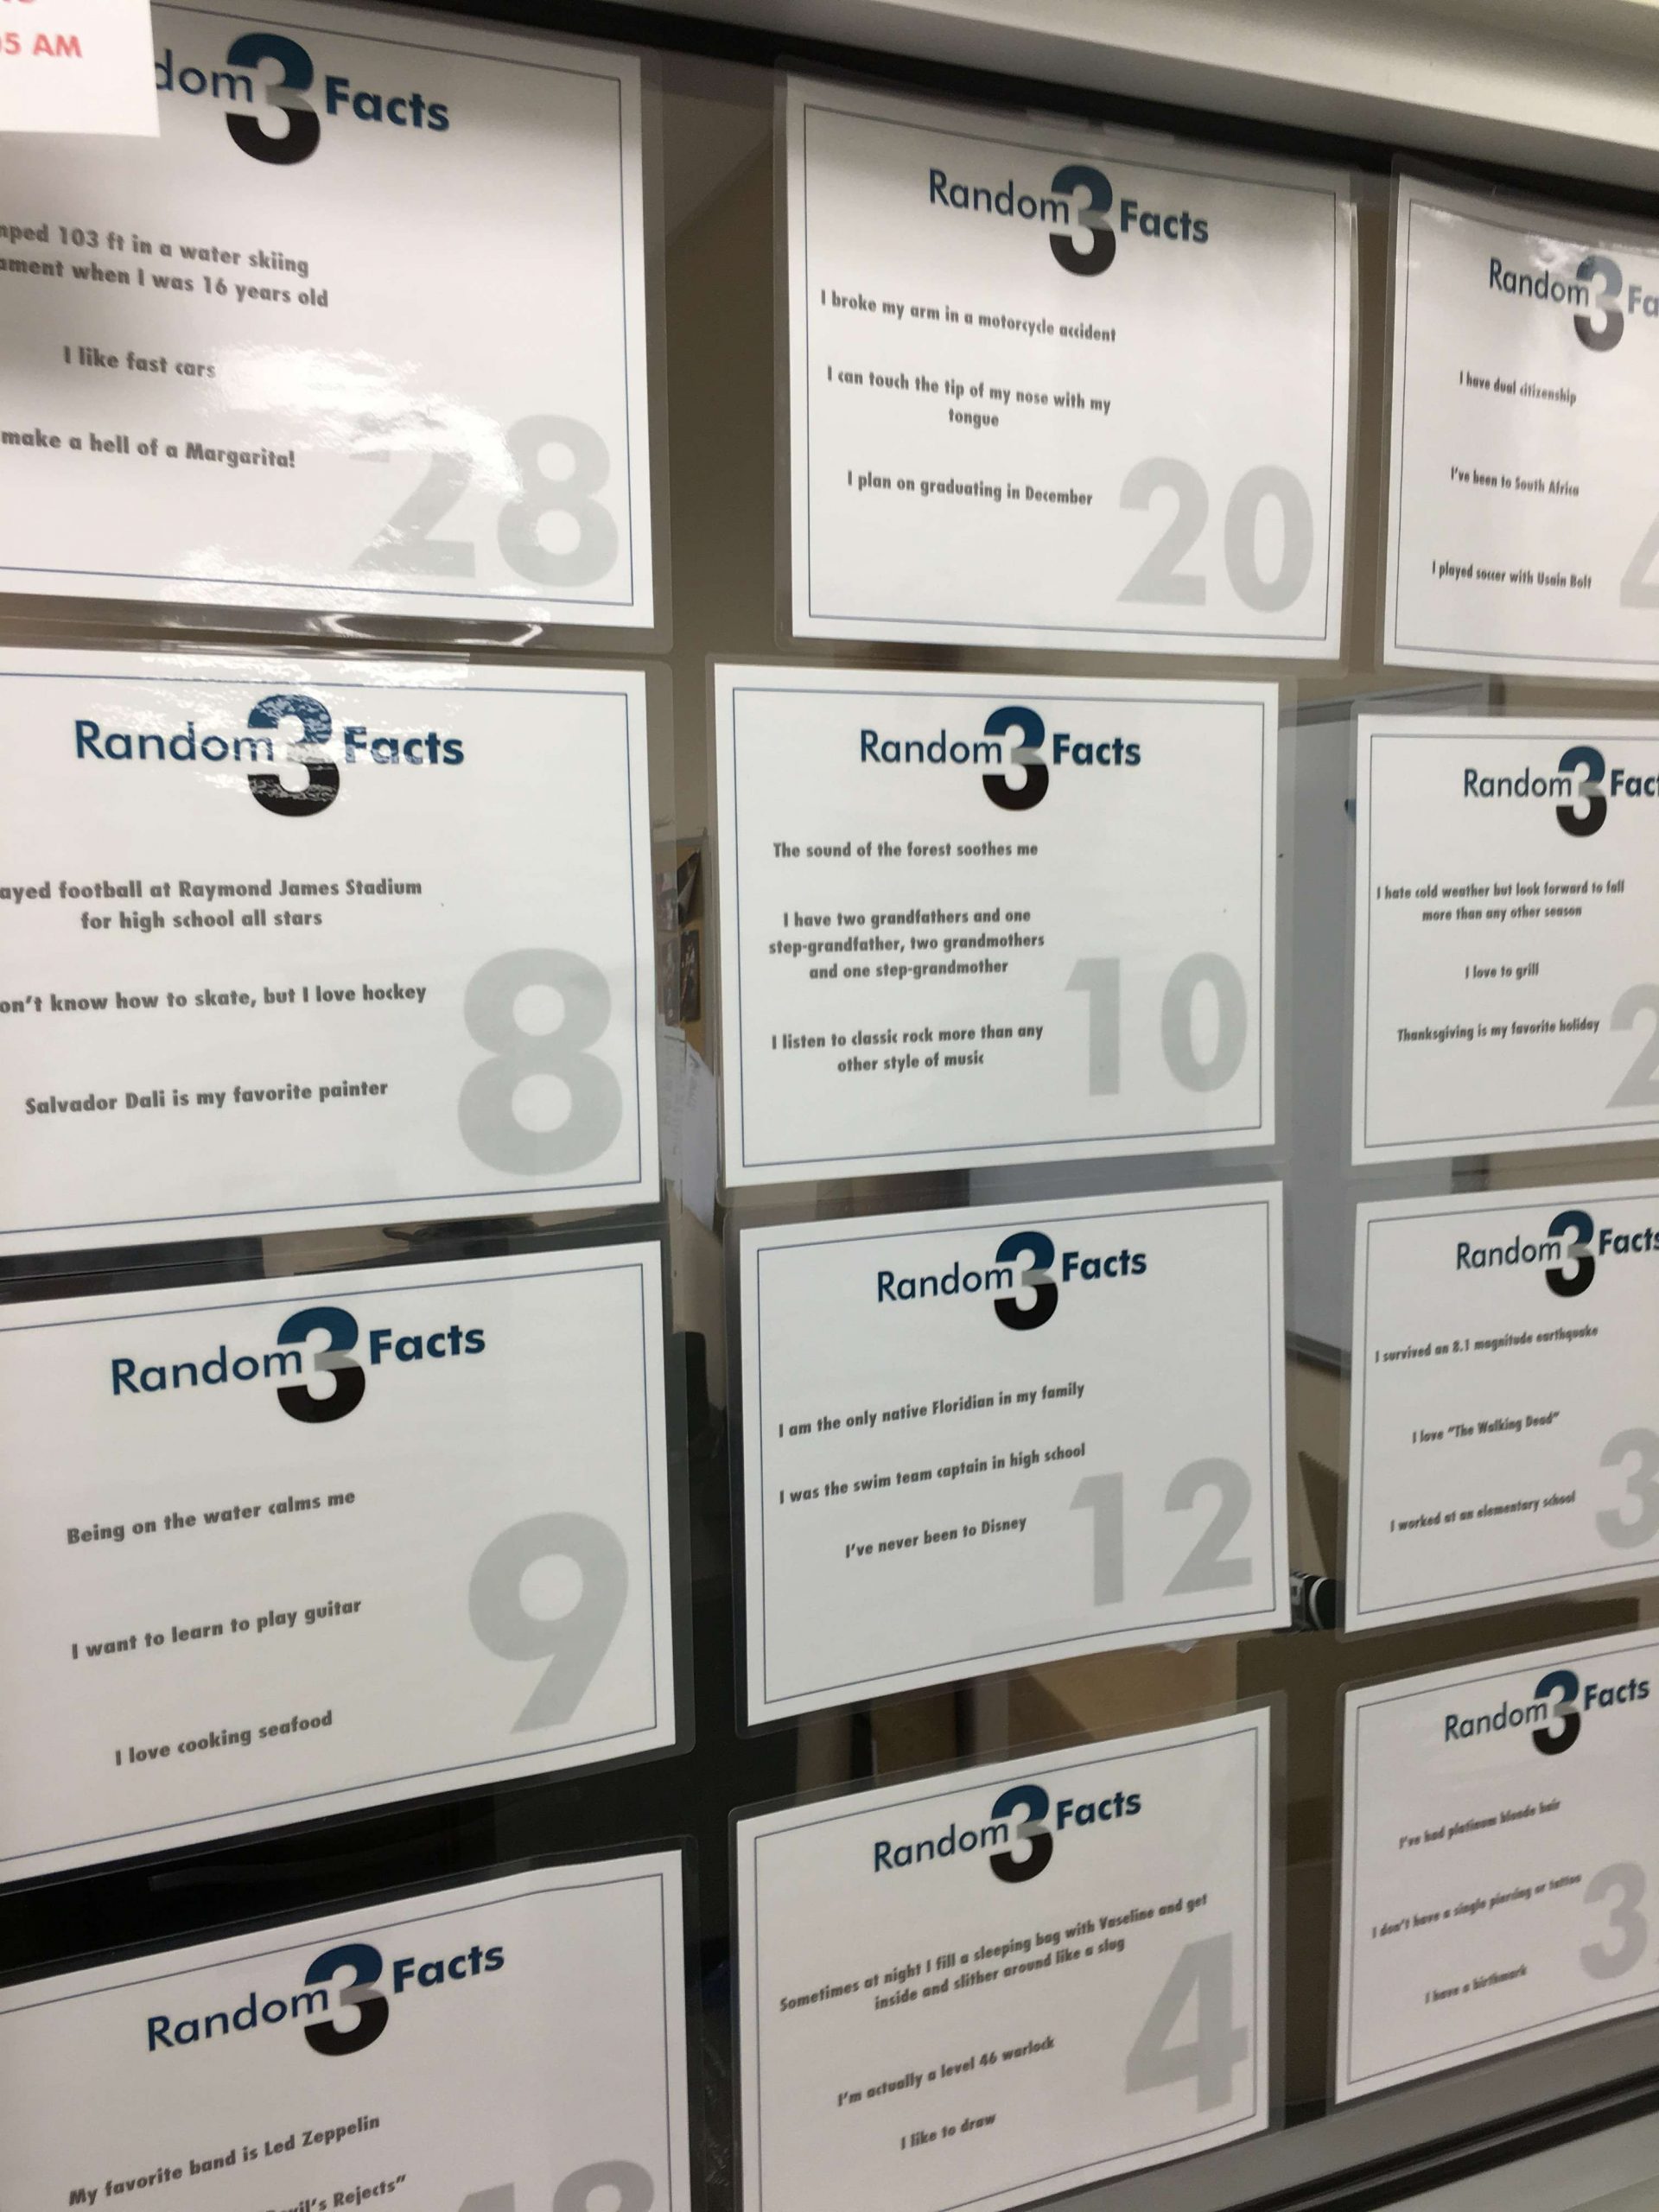 At JL Marine, company morale is important. Throughout the building are 8 x 10 posters offering hints to the identities of specific employees. Itâs their way of getting to know each other more closely.